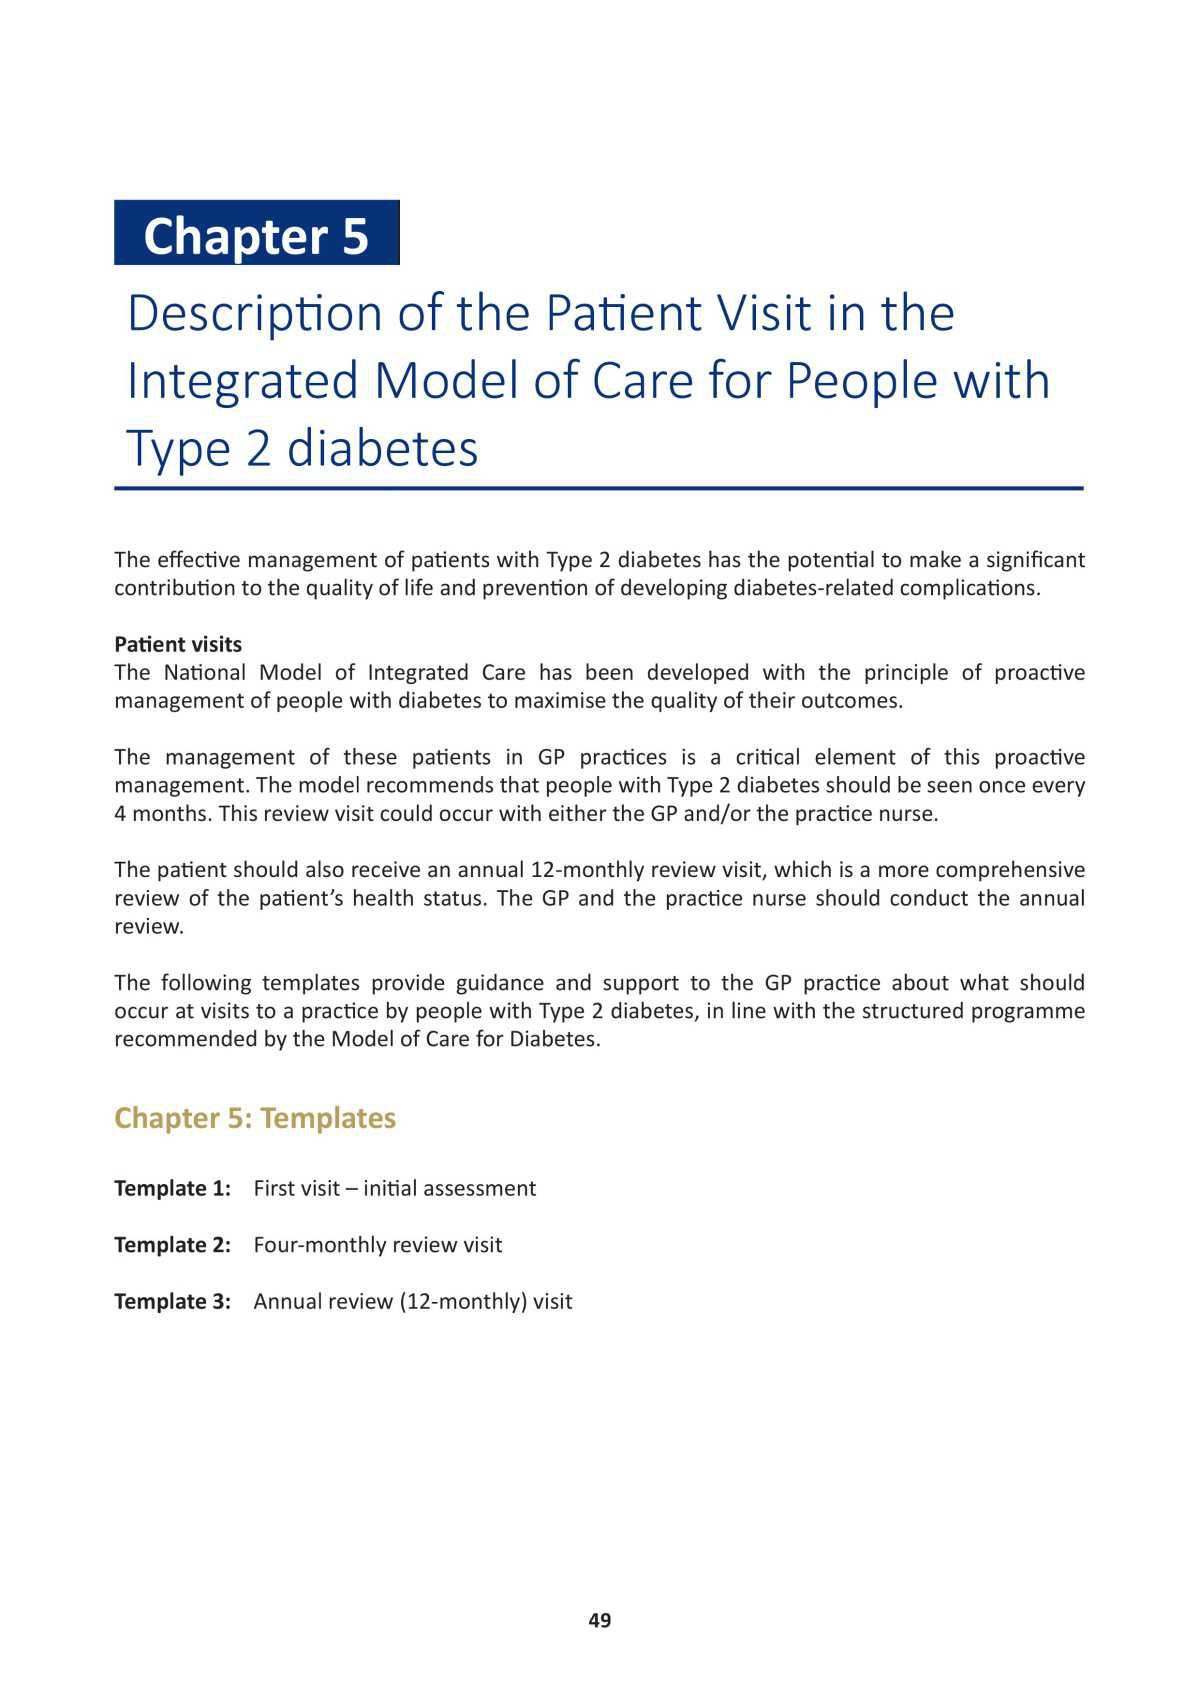 Model of Integrated Care for Patients with Type 2 Diabetes 